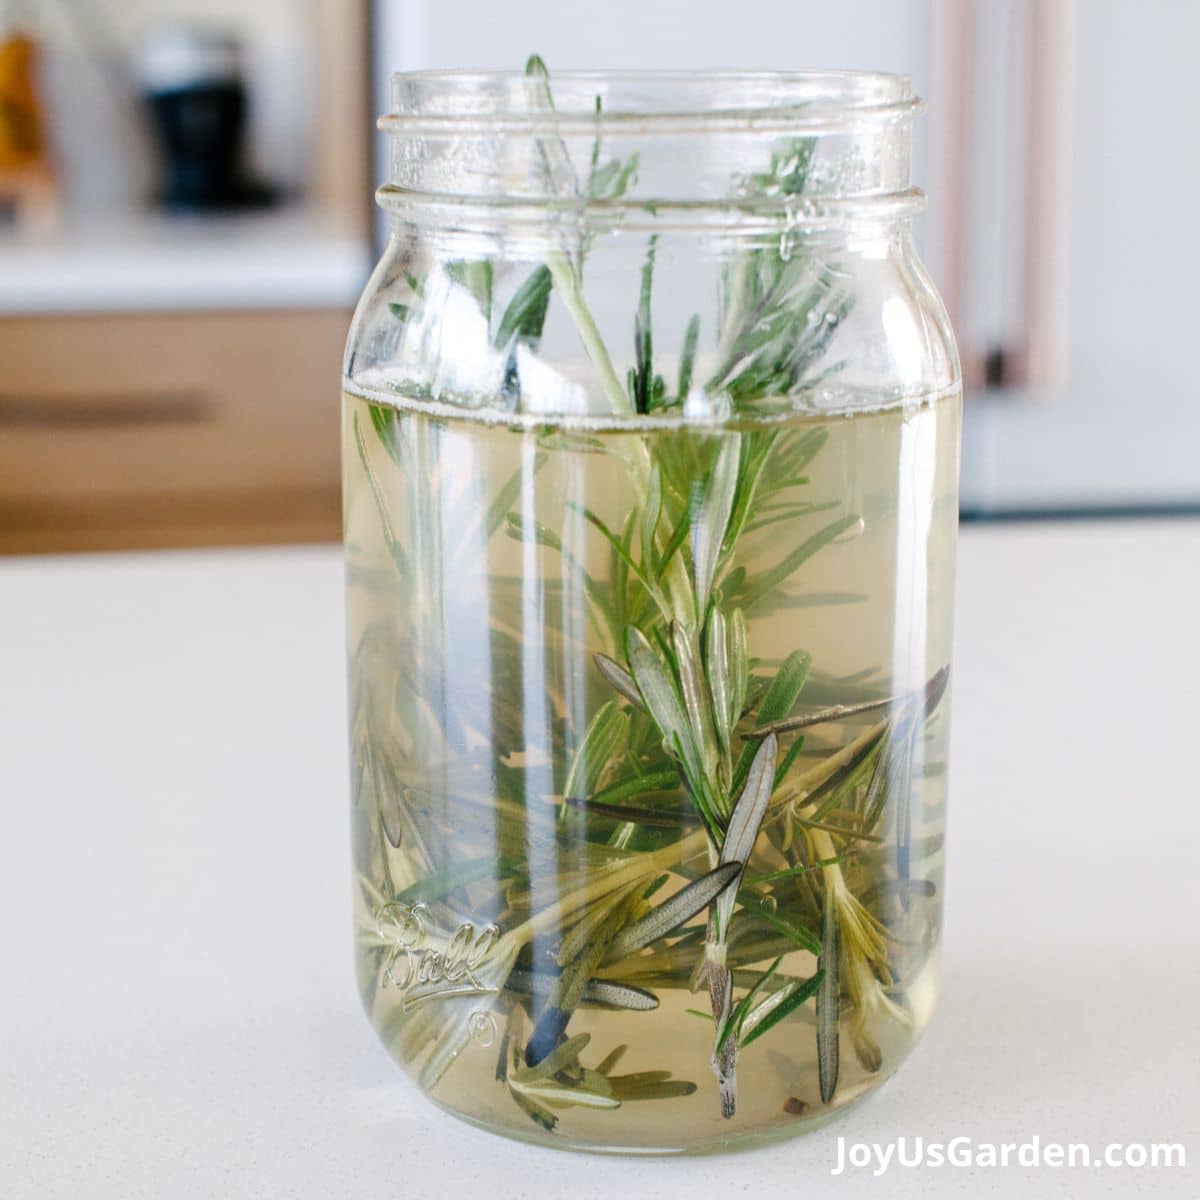 rosemary shown in mason jar filled with water on kitchen counter